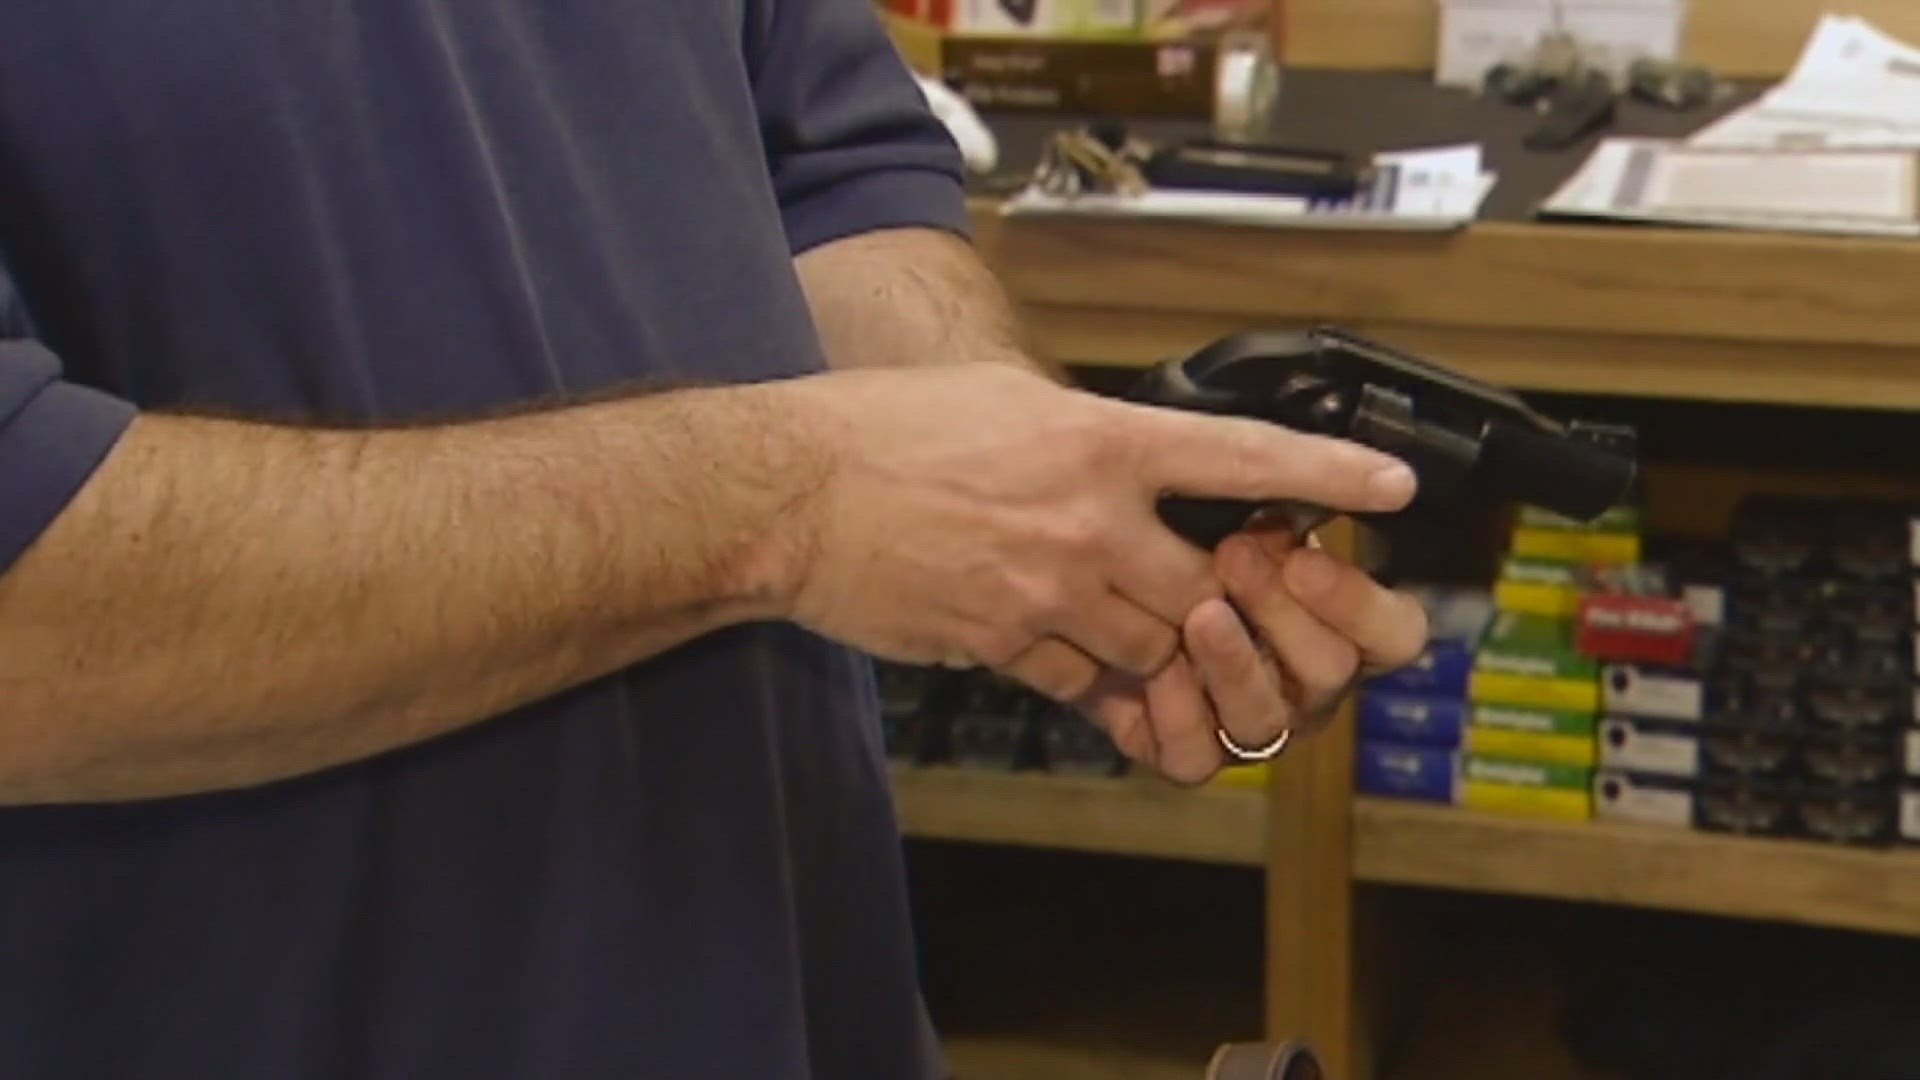 Concealed carry was signed into law by Governor Landry last month and will go into effect in July.